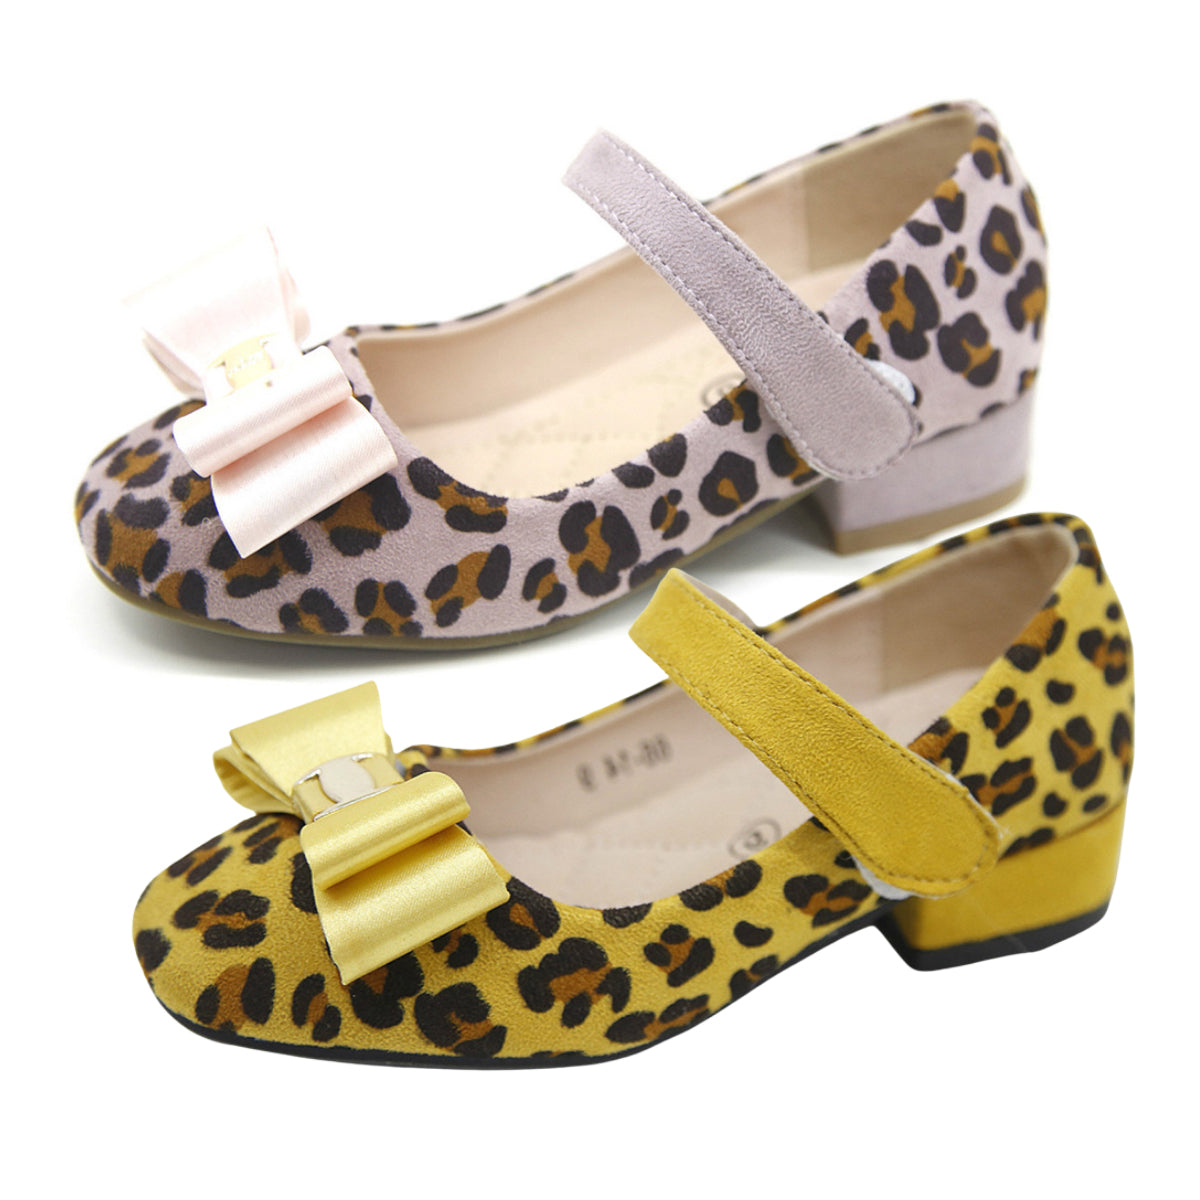 Girls / Children's leopard Print low heel shoes with bow